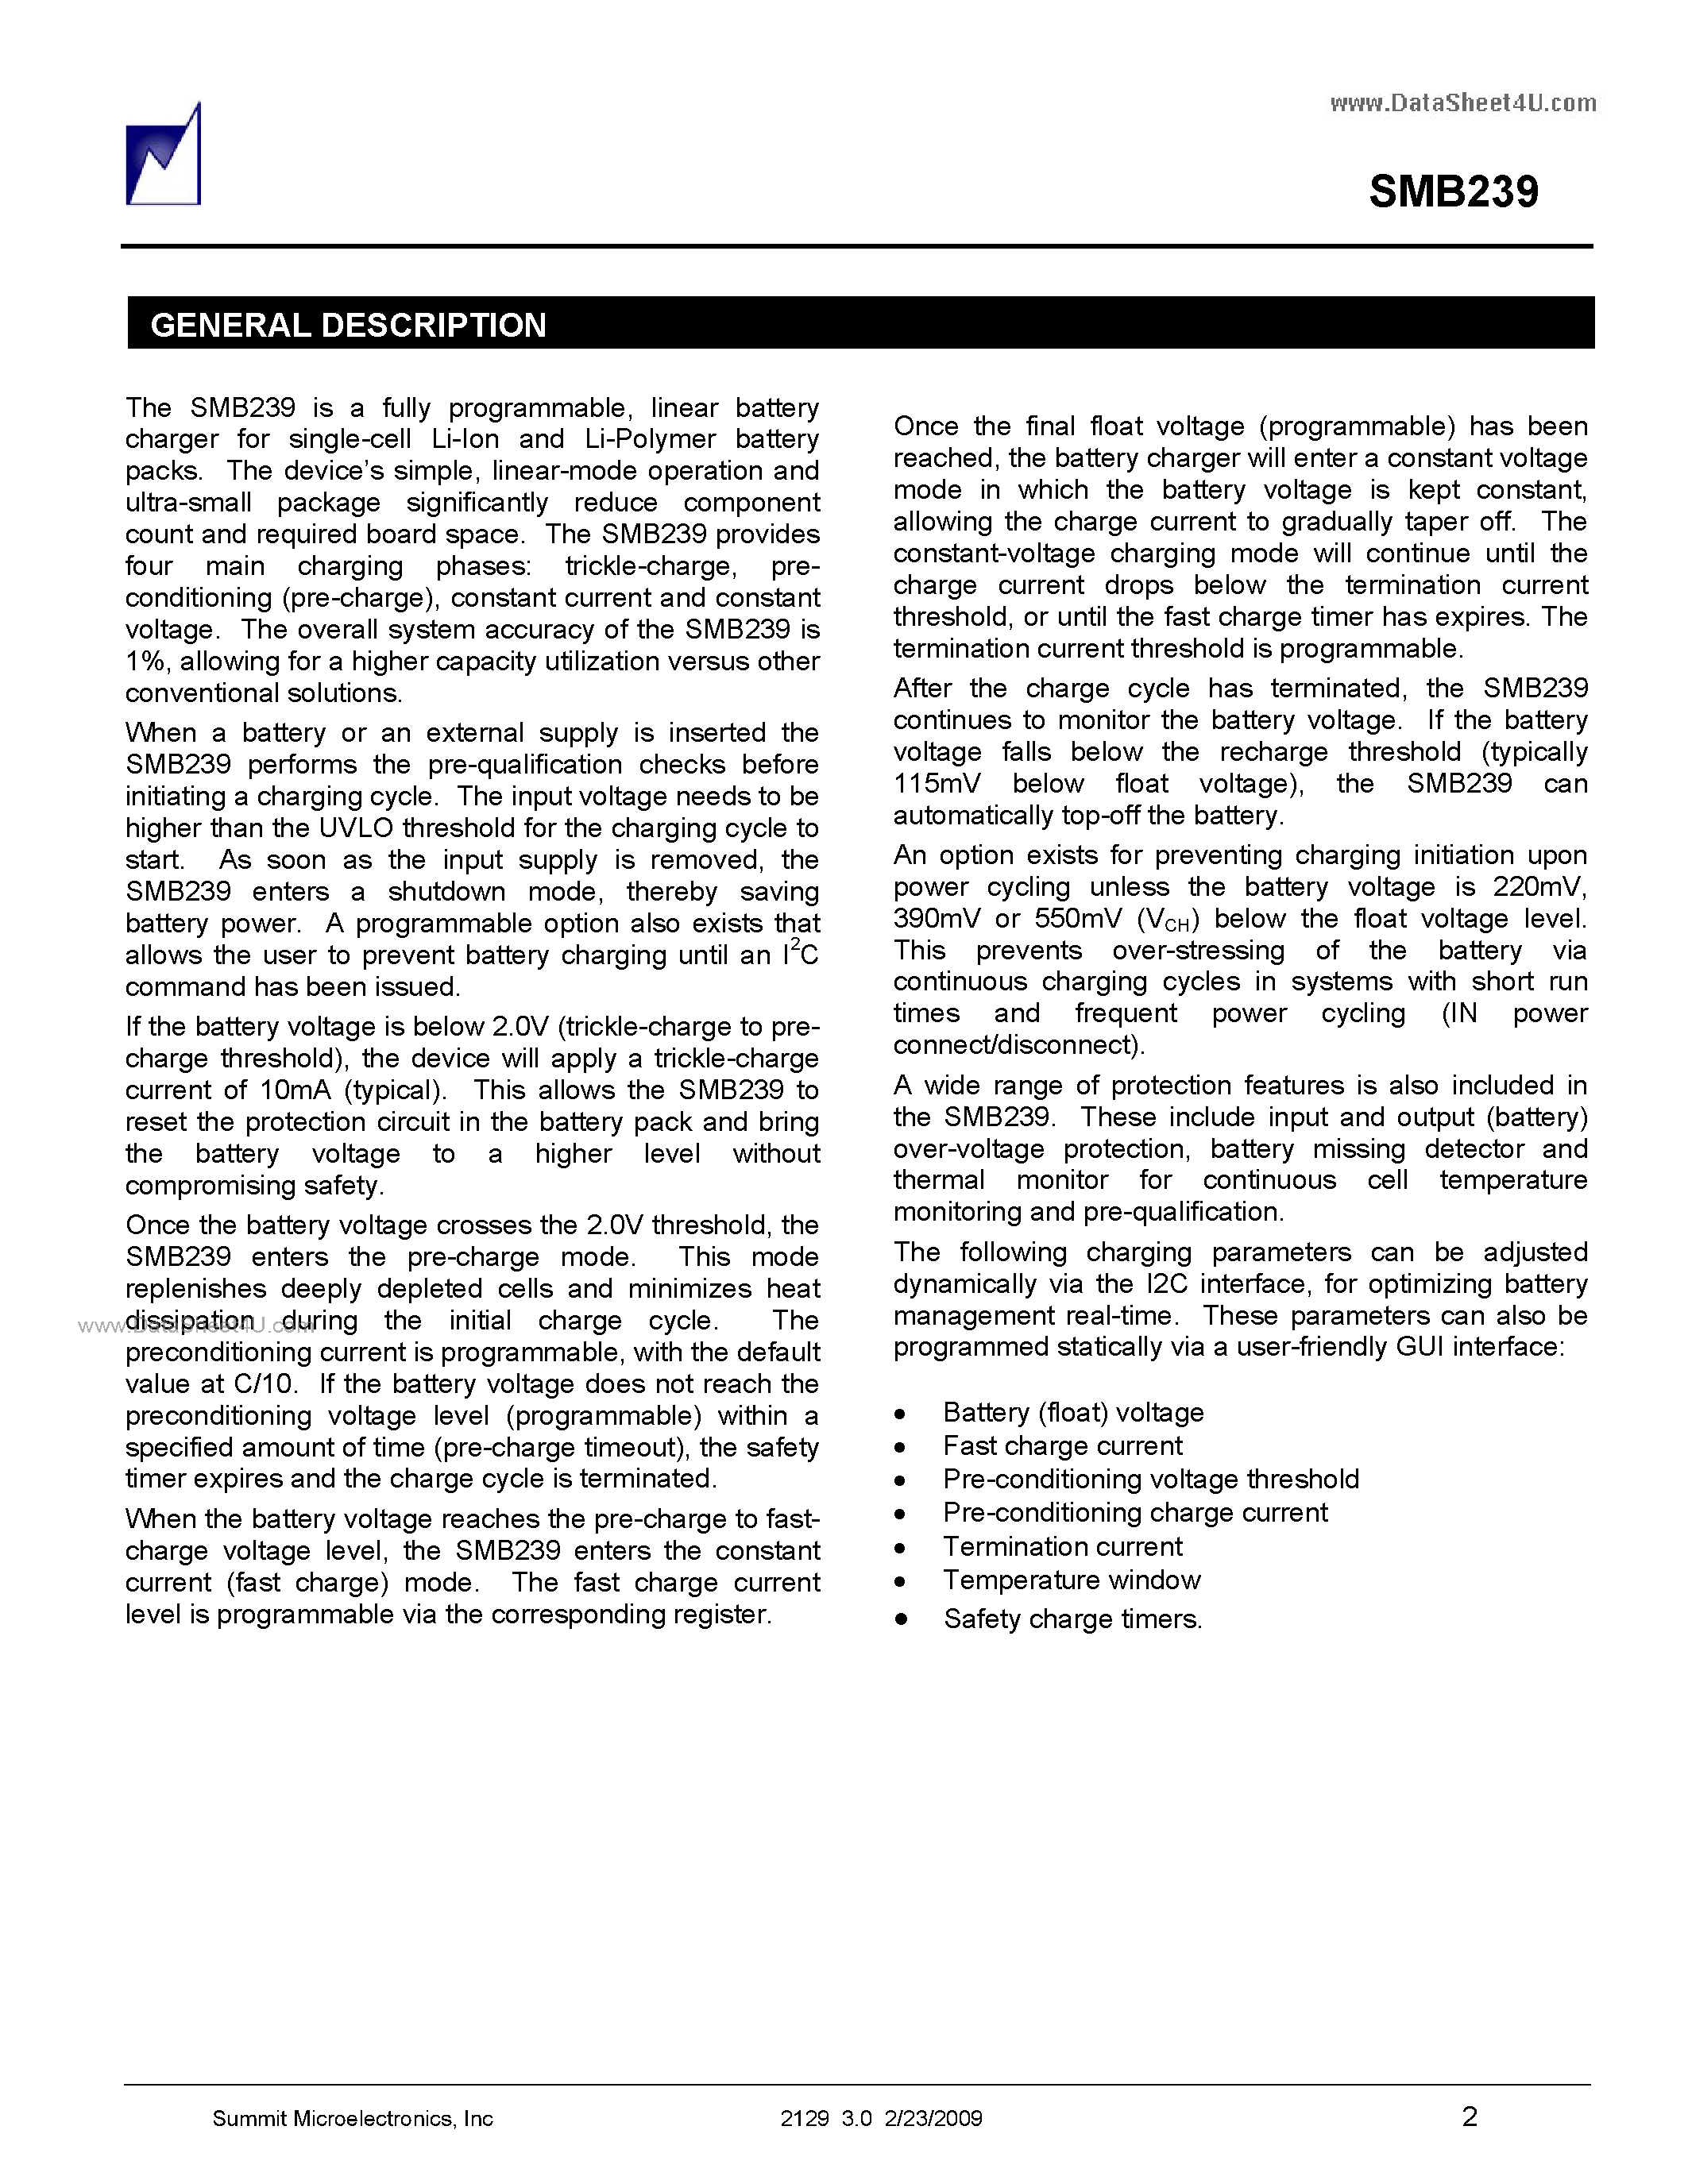 Datasheet SMB239 - Programmable Linear Battery Charger page 2